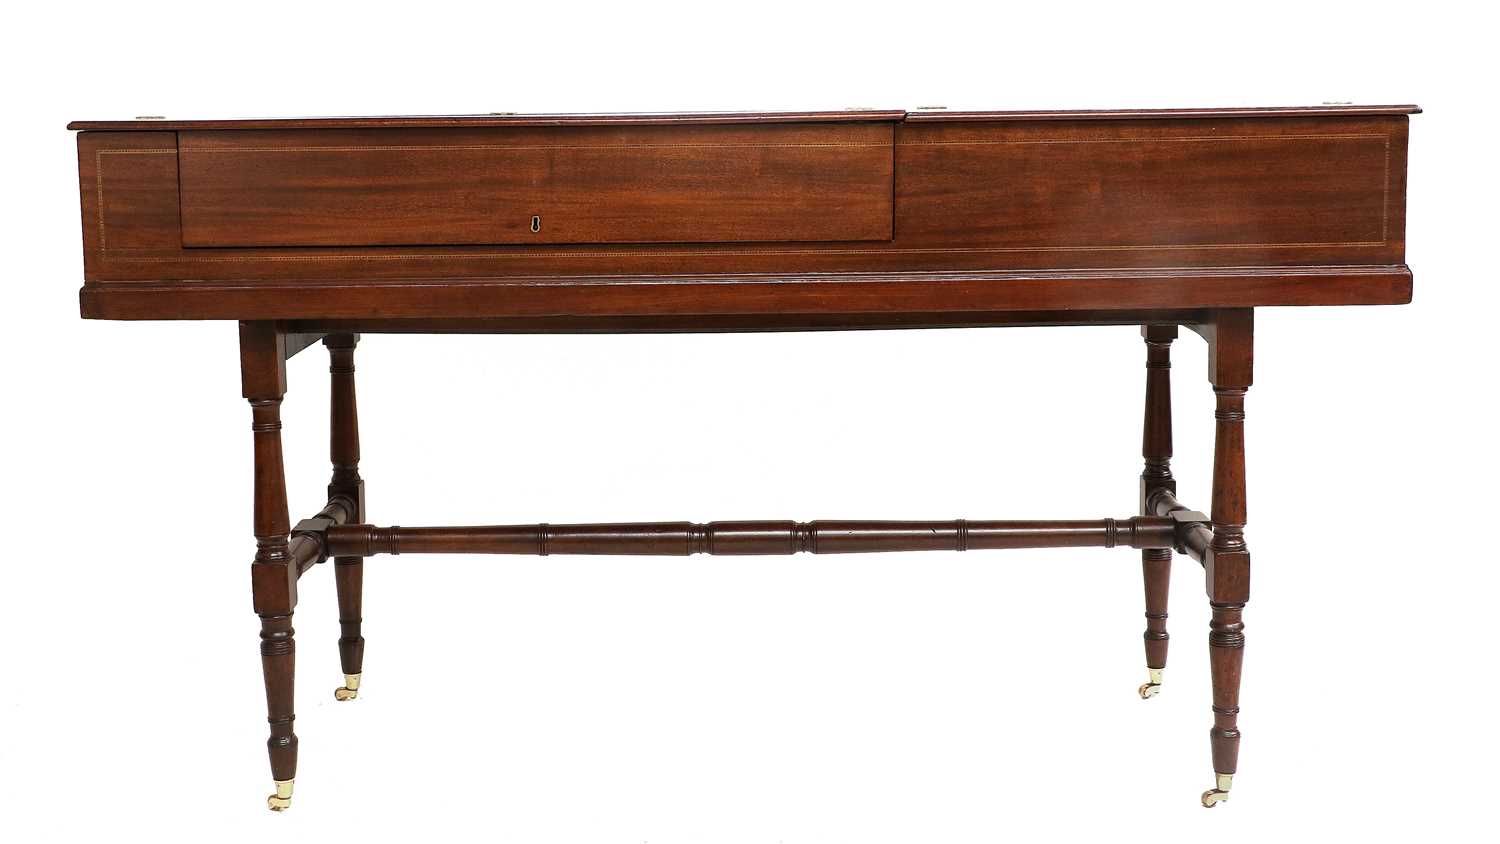 A George III Mahogany and Parquetry-Decorated Square Piano, circa 1800, the hinged lid enclosing a - Image 3 of 11